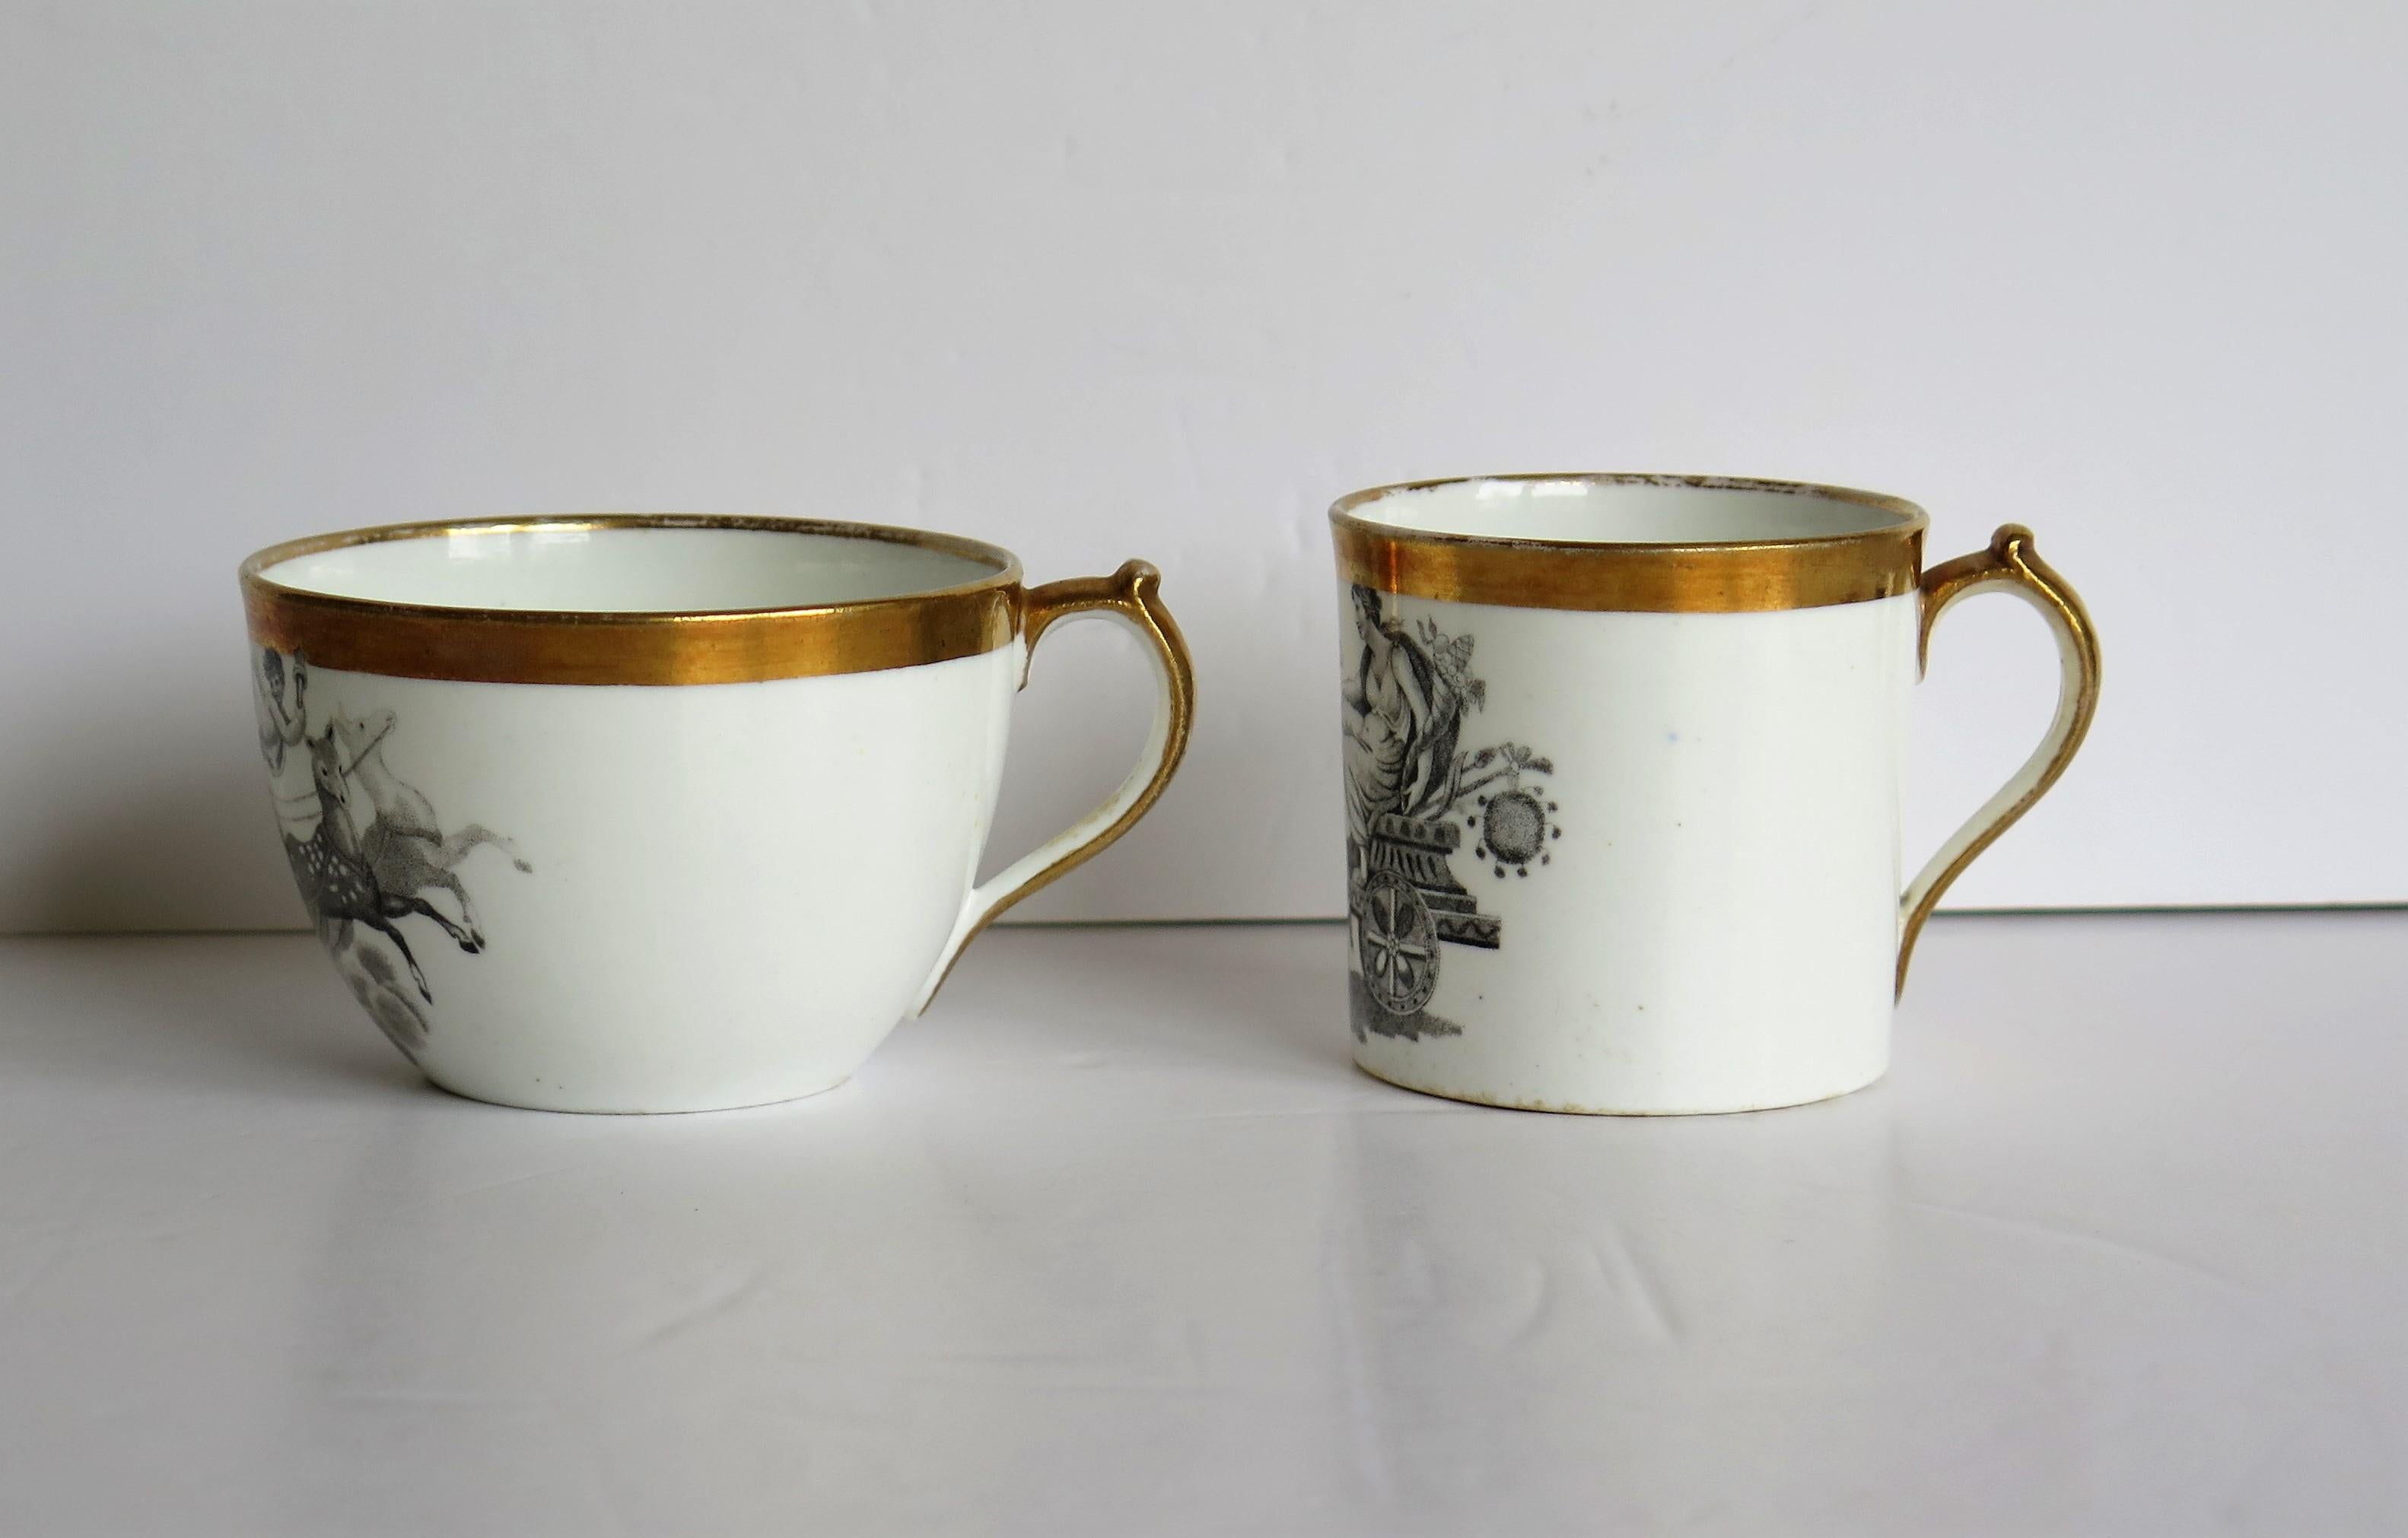 These are a beautiful matching pair of porcelain cups comprising a coffee can and a tea cup, in a classical bat printed pattern umber 349, made by Miles Mason (Mason's), Staffordshire Potteries, England around the turn of the 18th century, circa